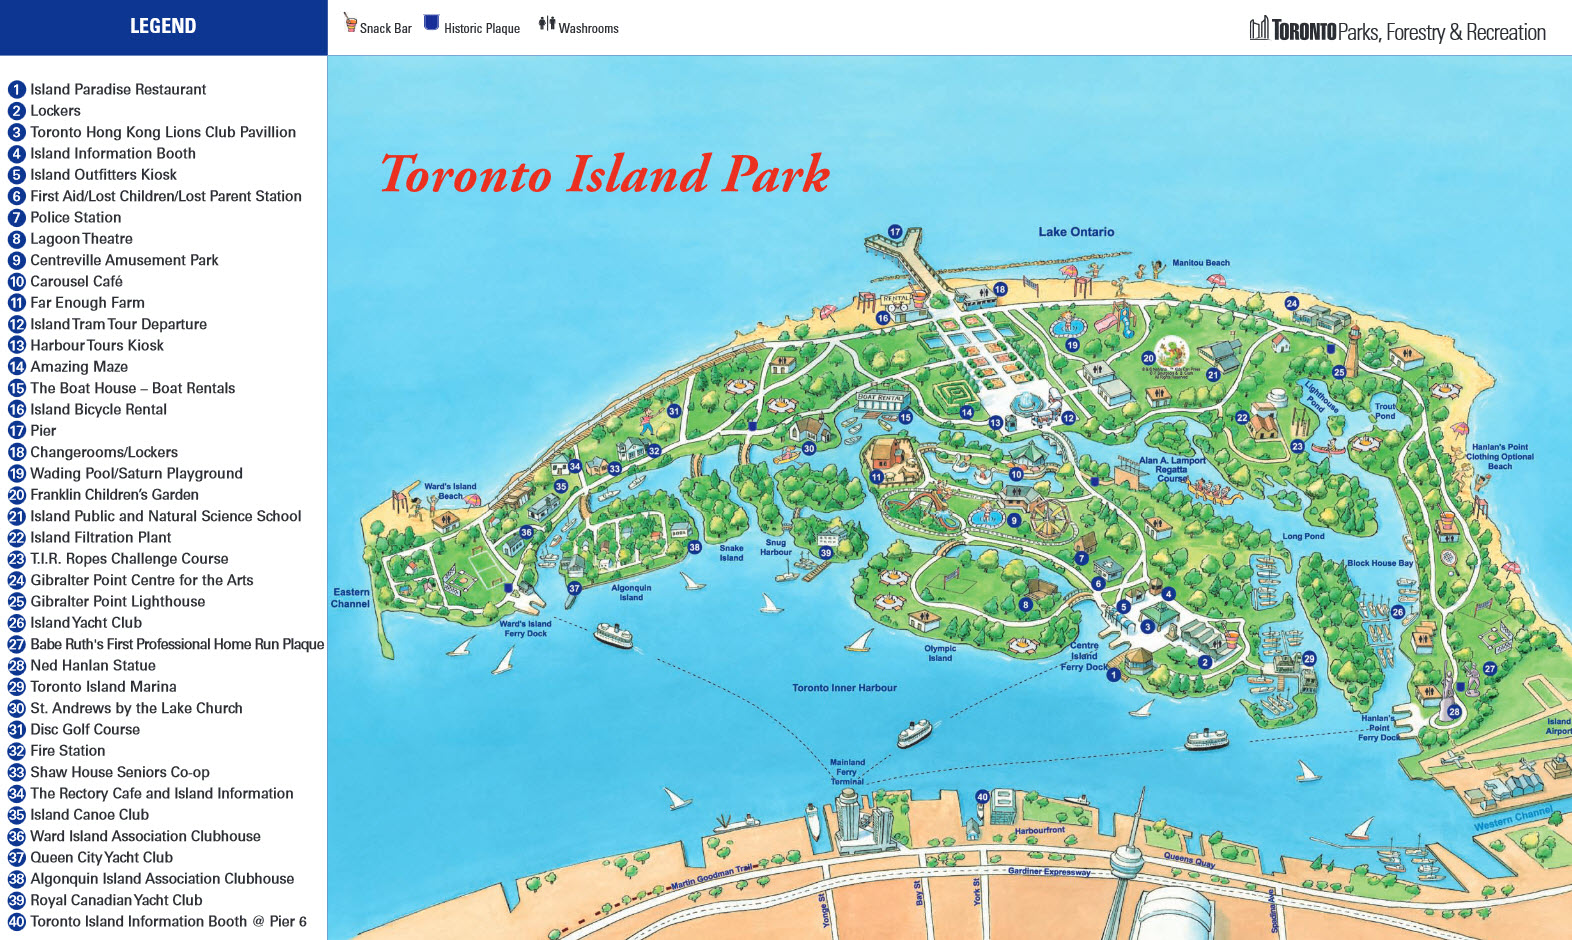 Map of Toronto Island Park. It's huge, with lots of attractions.